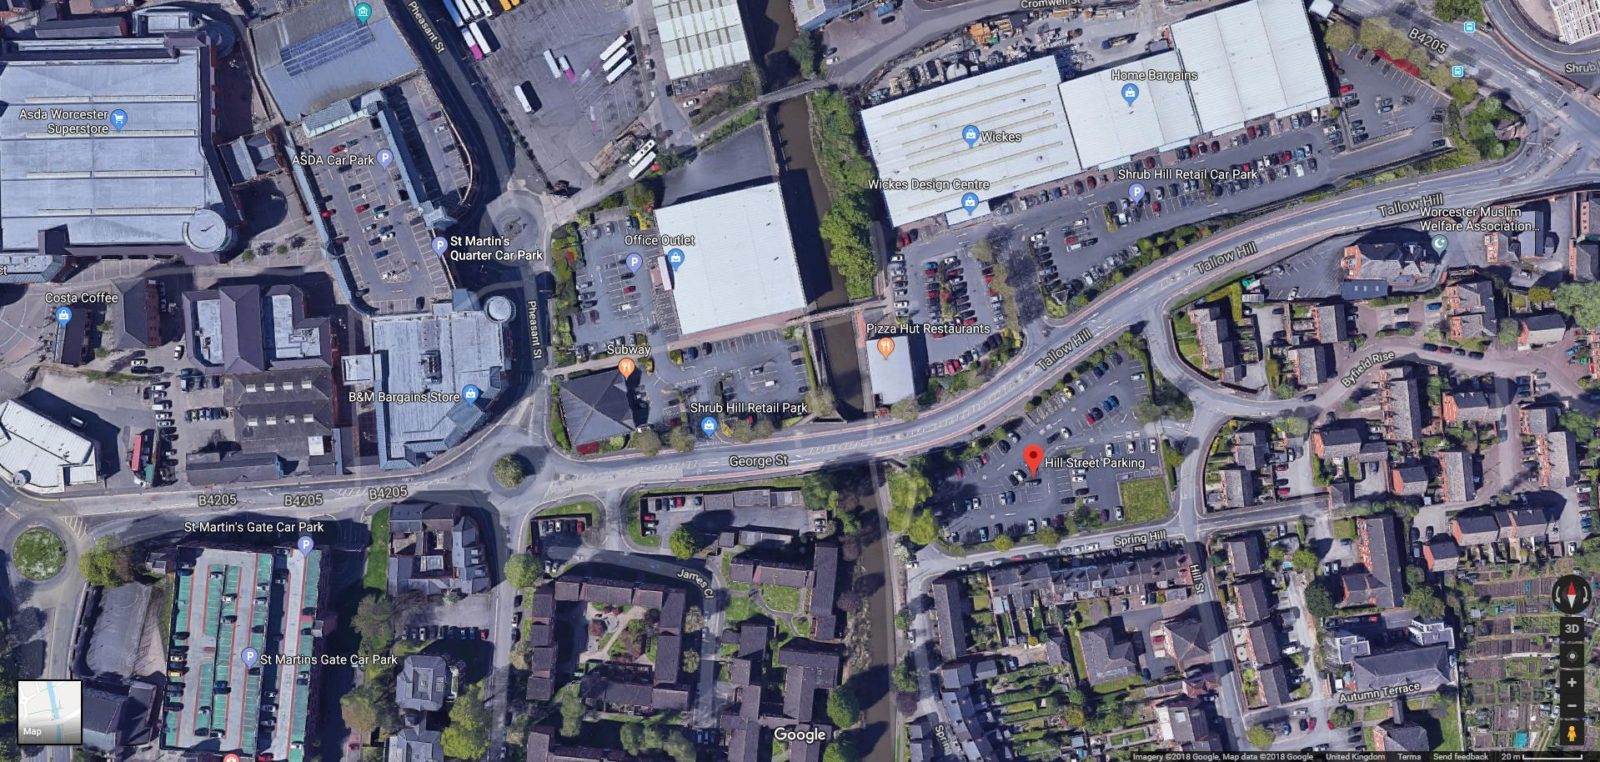 Map of area of Worcester showing Hill Street Car Park (off Tallow Hill) opposite Shrub Hill Retail Park